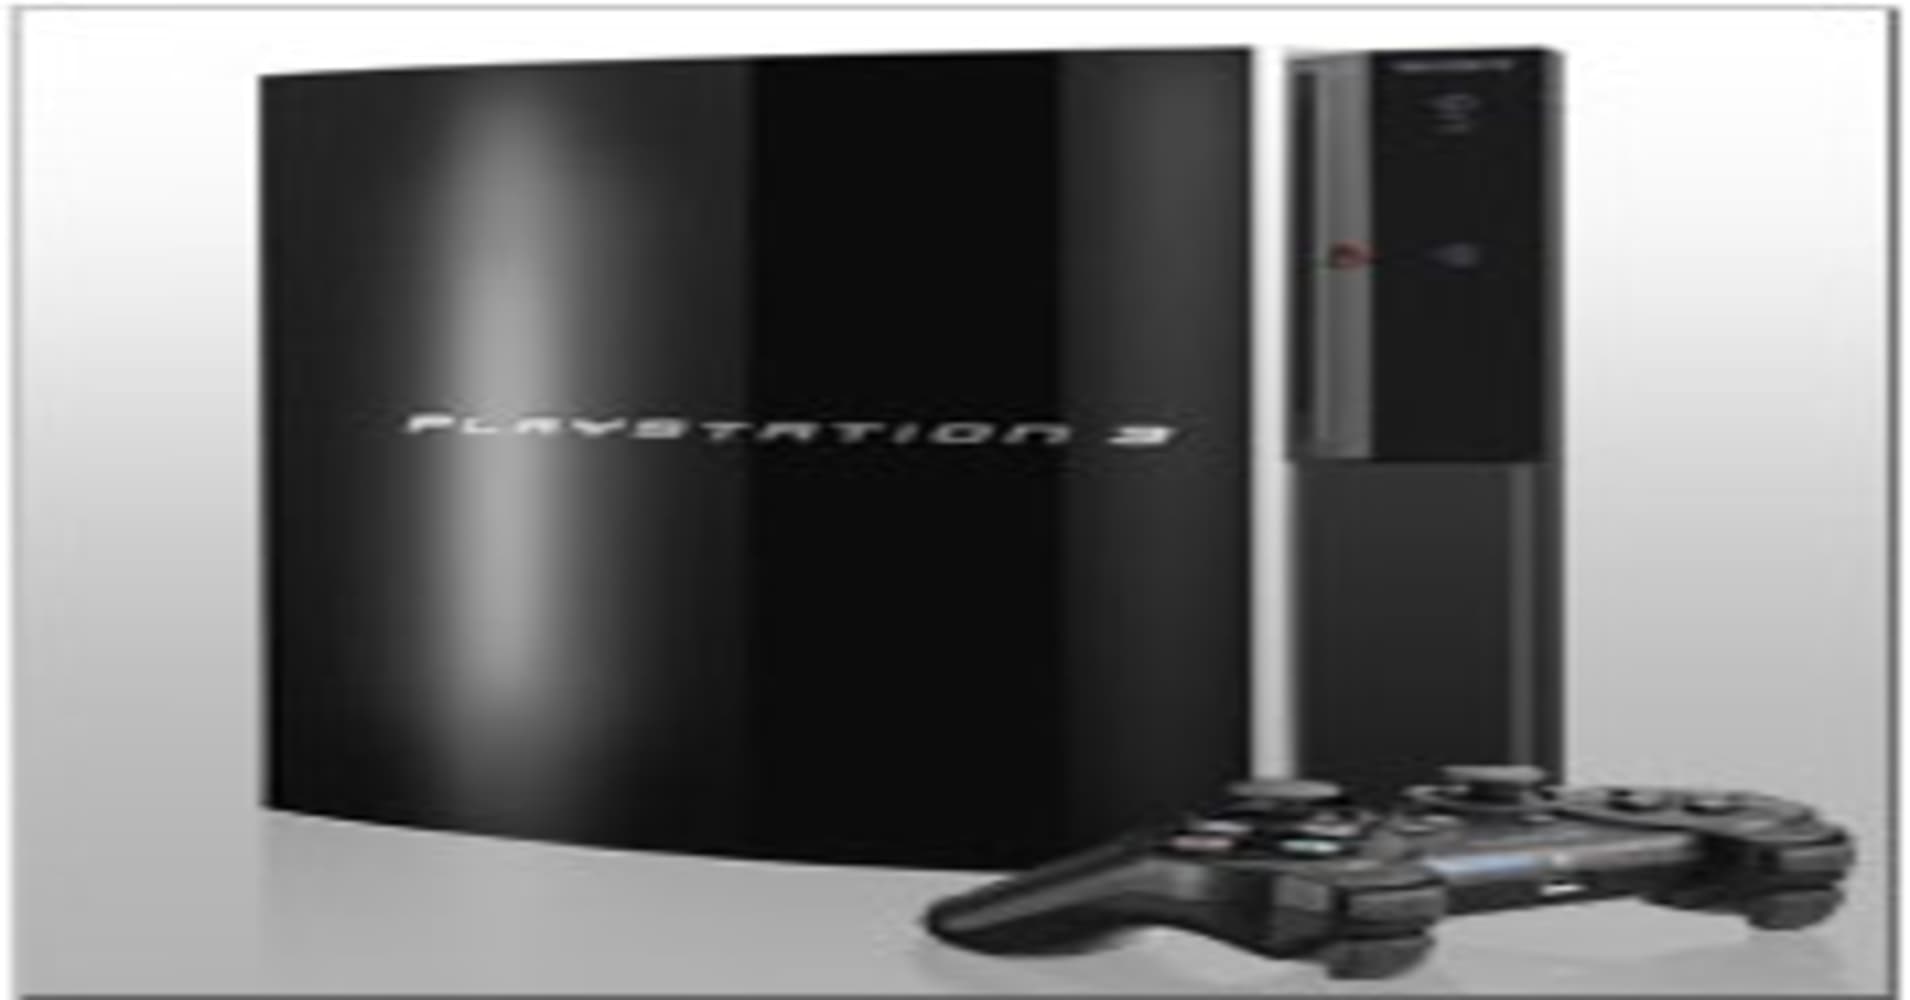 PS3 Price Cut is Just the Start: Execs